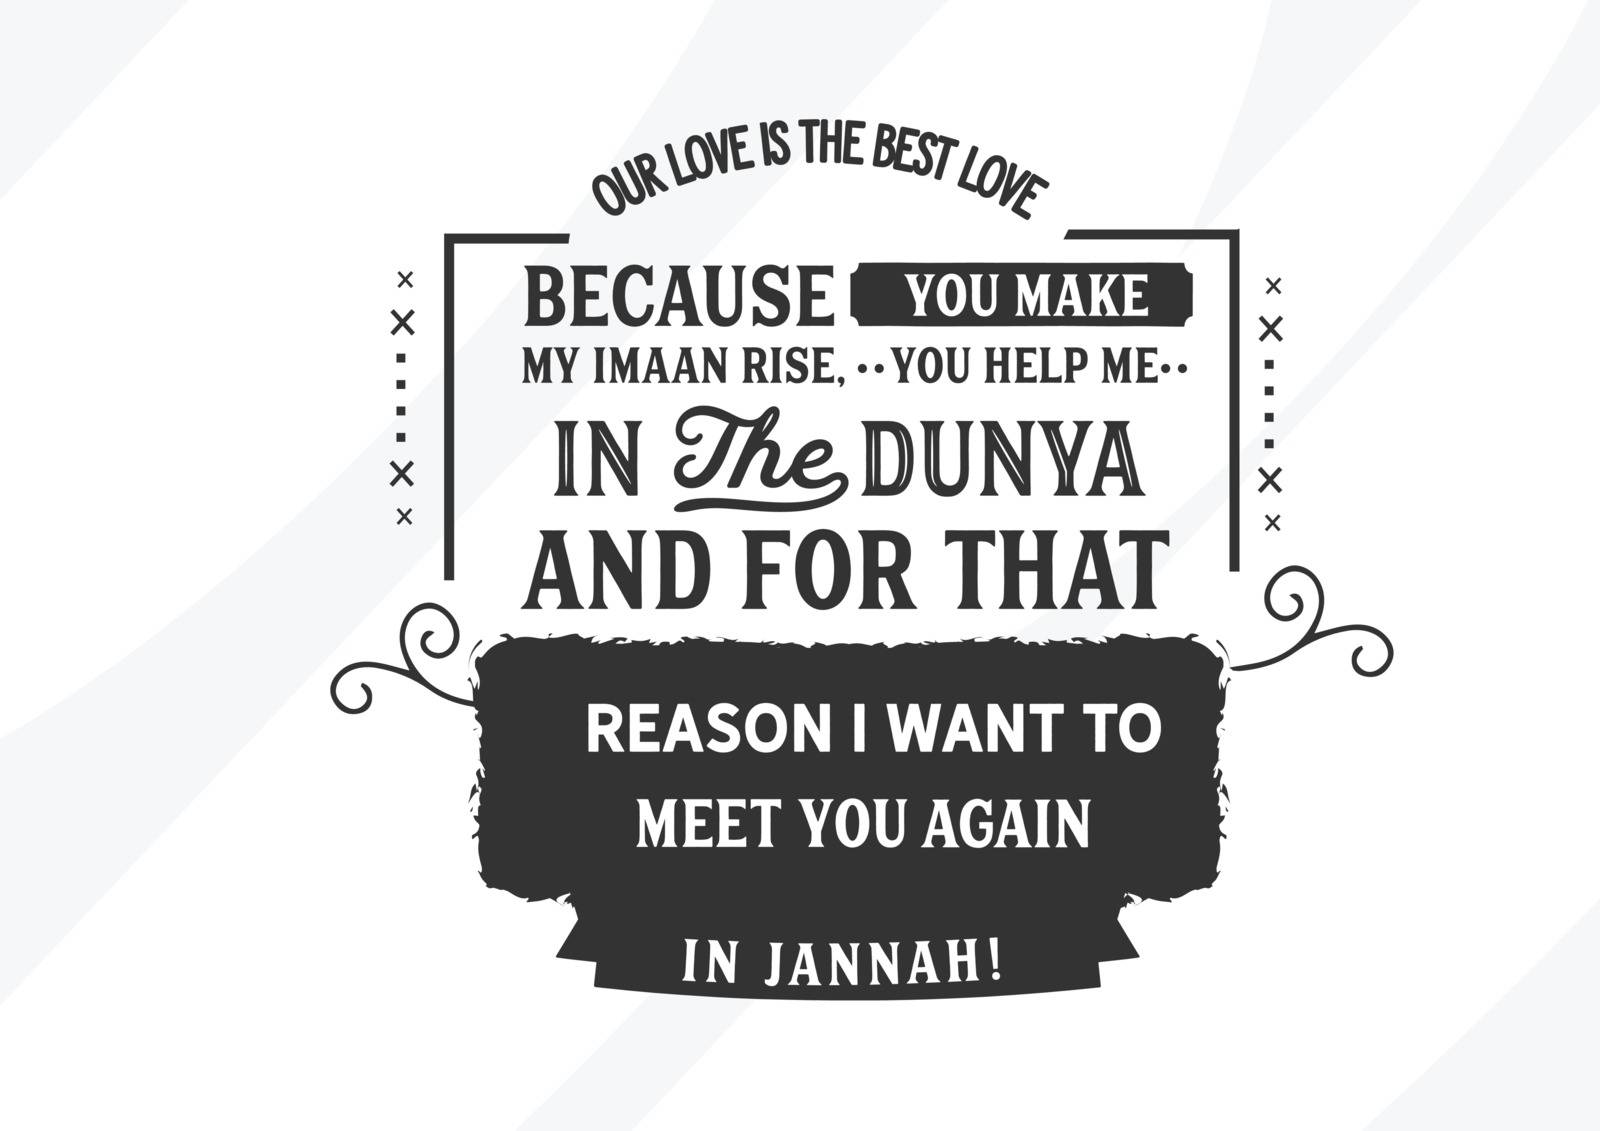 Our love is the best love because you make my imaan rise, you help me in the dunya and for that reason i want to meet you again in Jannah!.